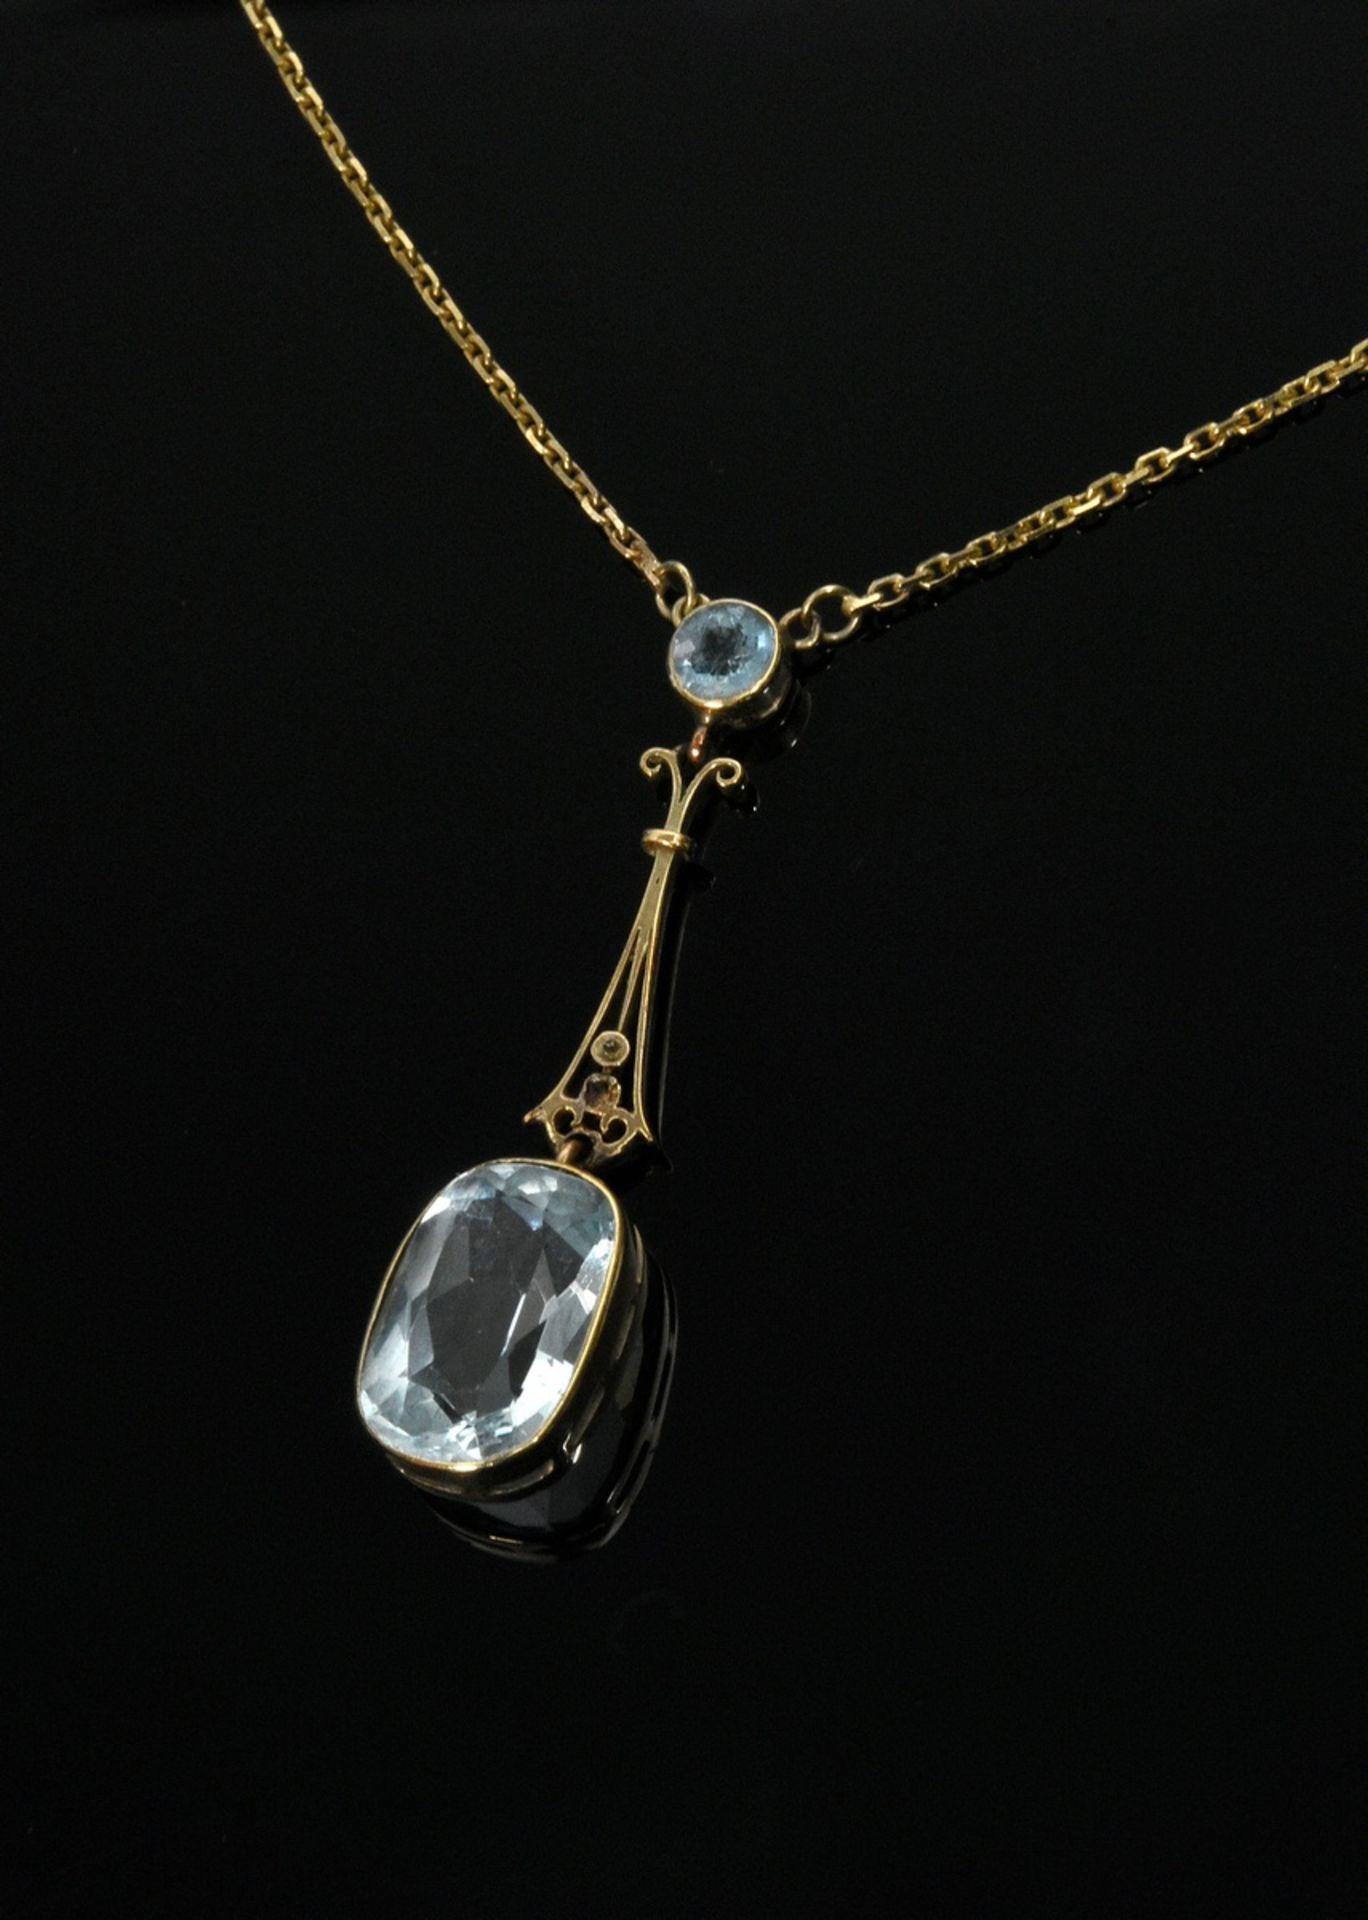 Delicate yellow gold 585 necklace of aquamarine art nouveau pendant (2 small pearls missing) on mod